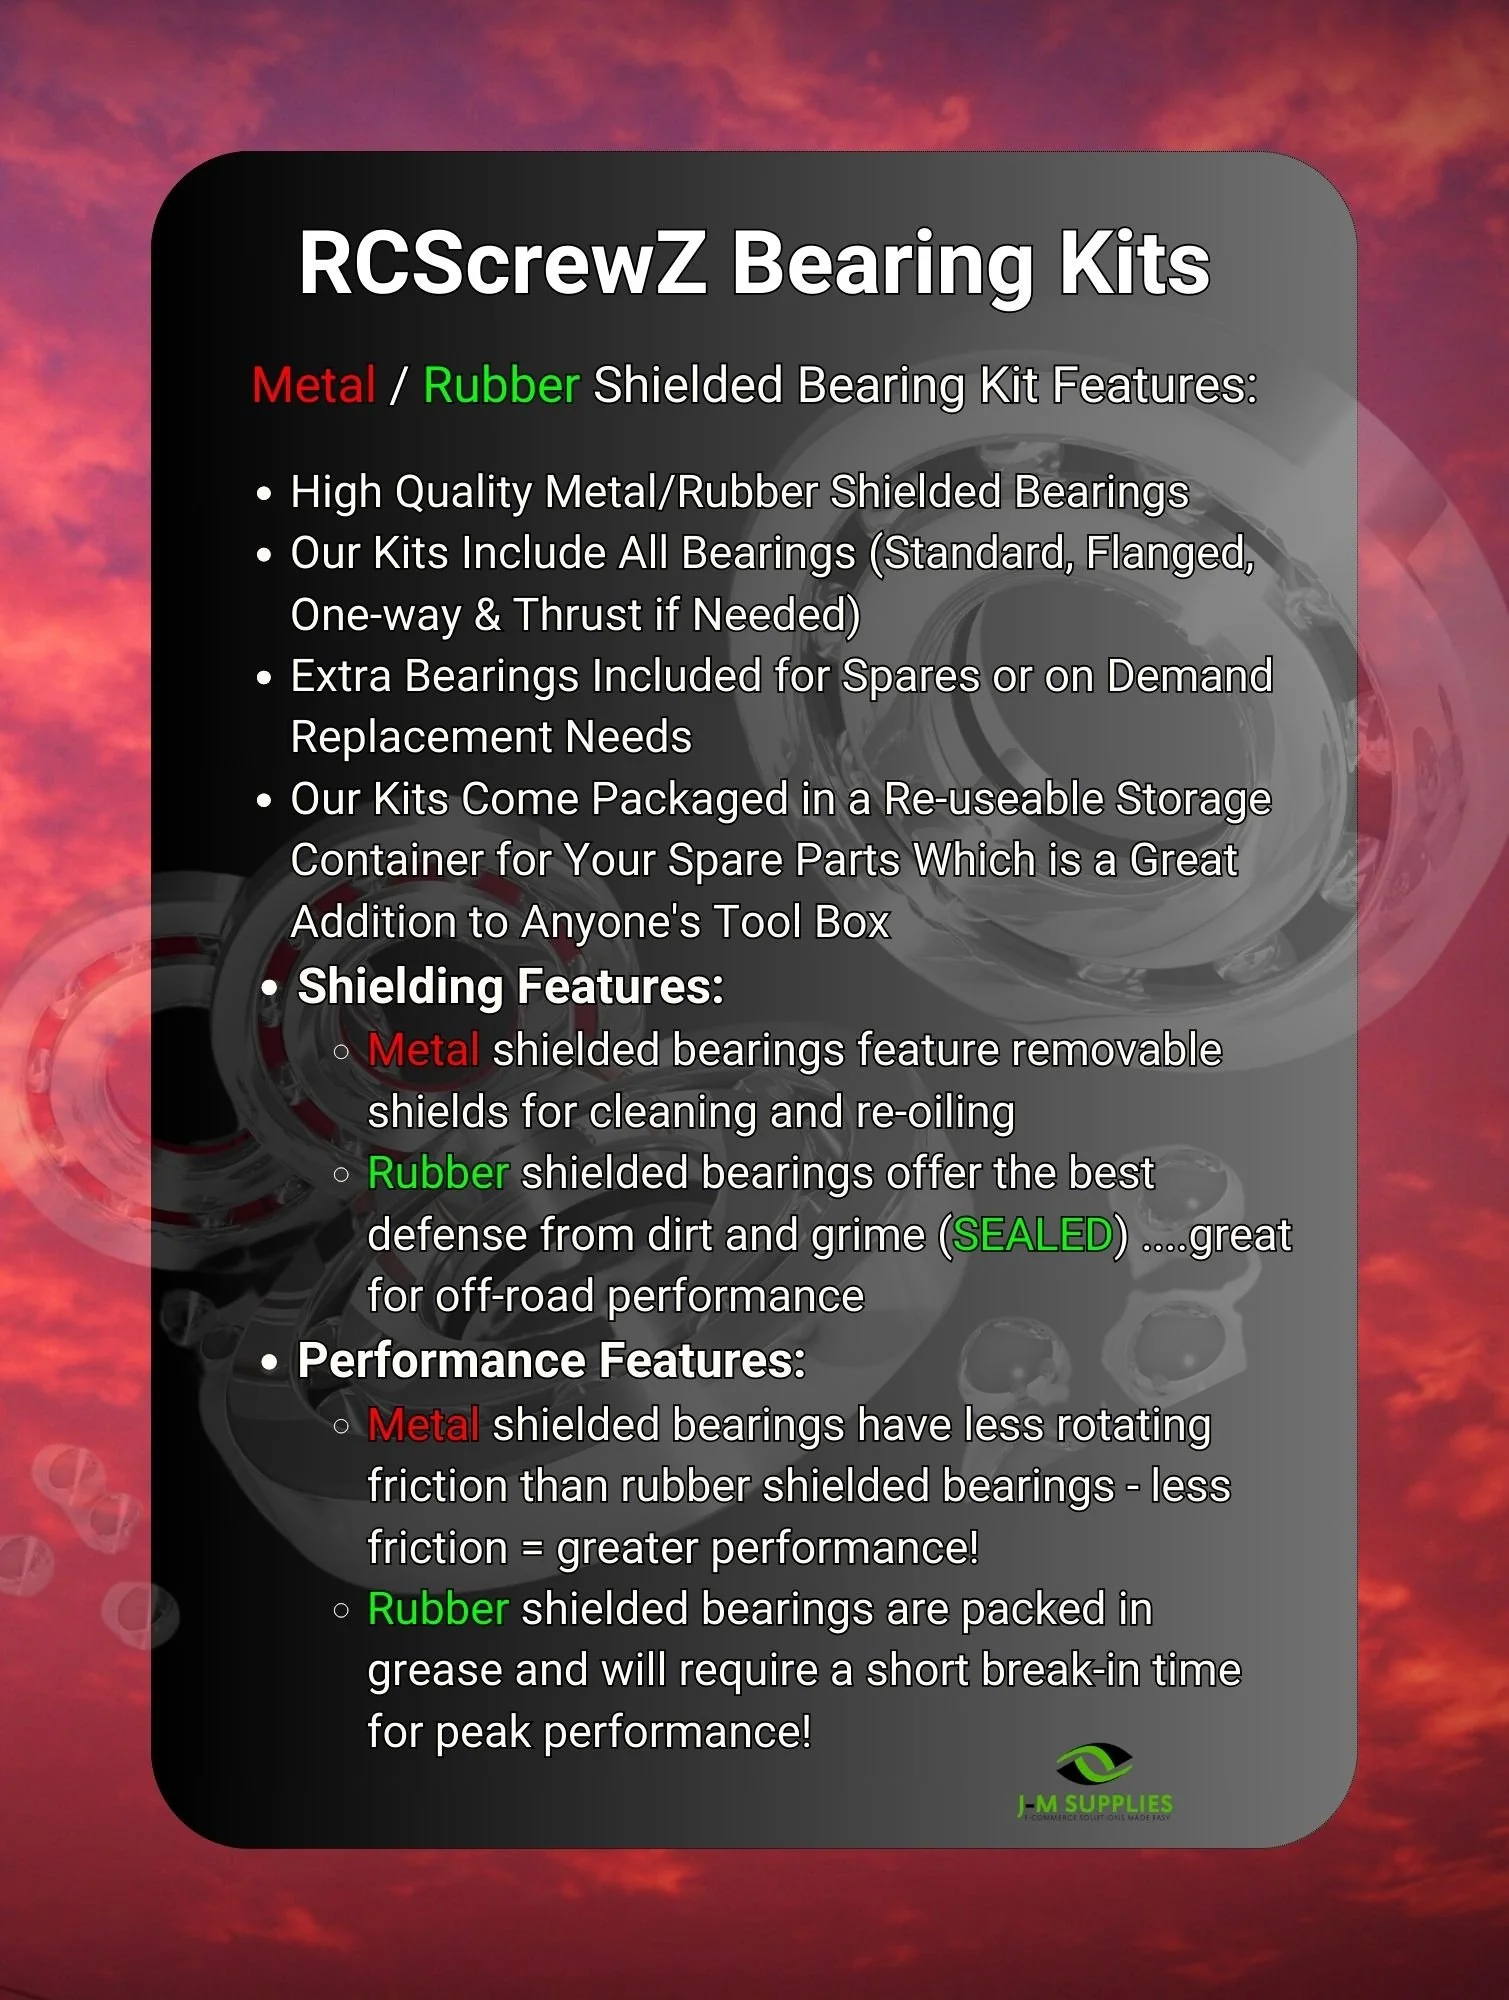 RCScrewZ Rubber Shielded Bearing Kit asc131r for Associated Rival MT10 #20516 - Picture 10 of 12